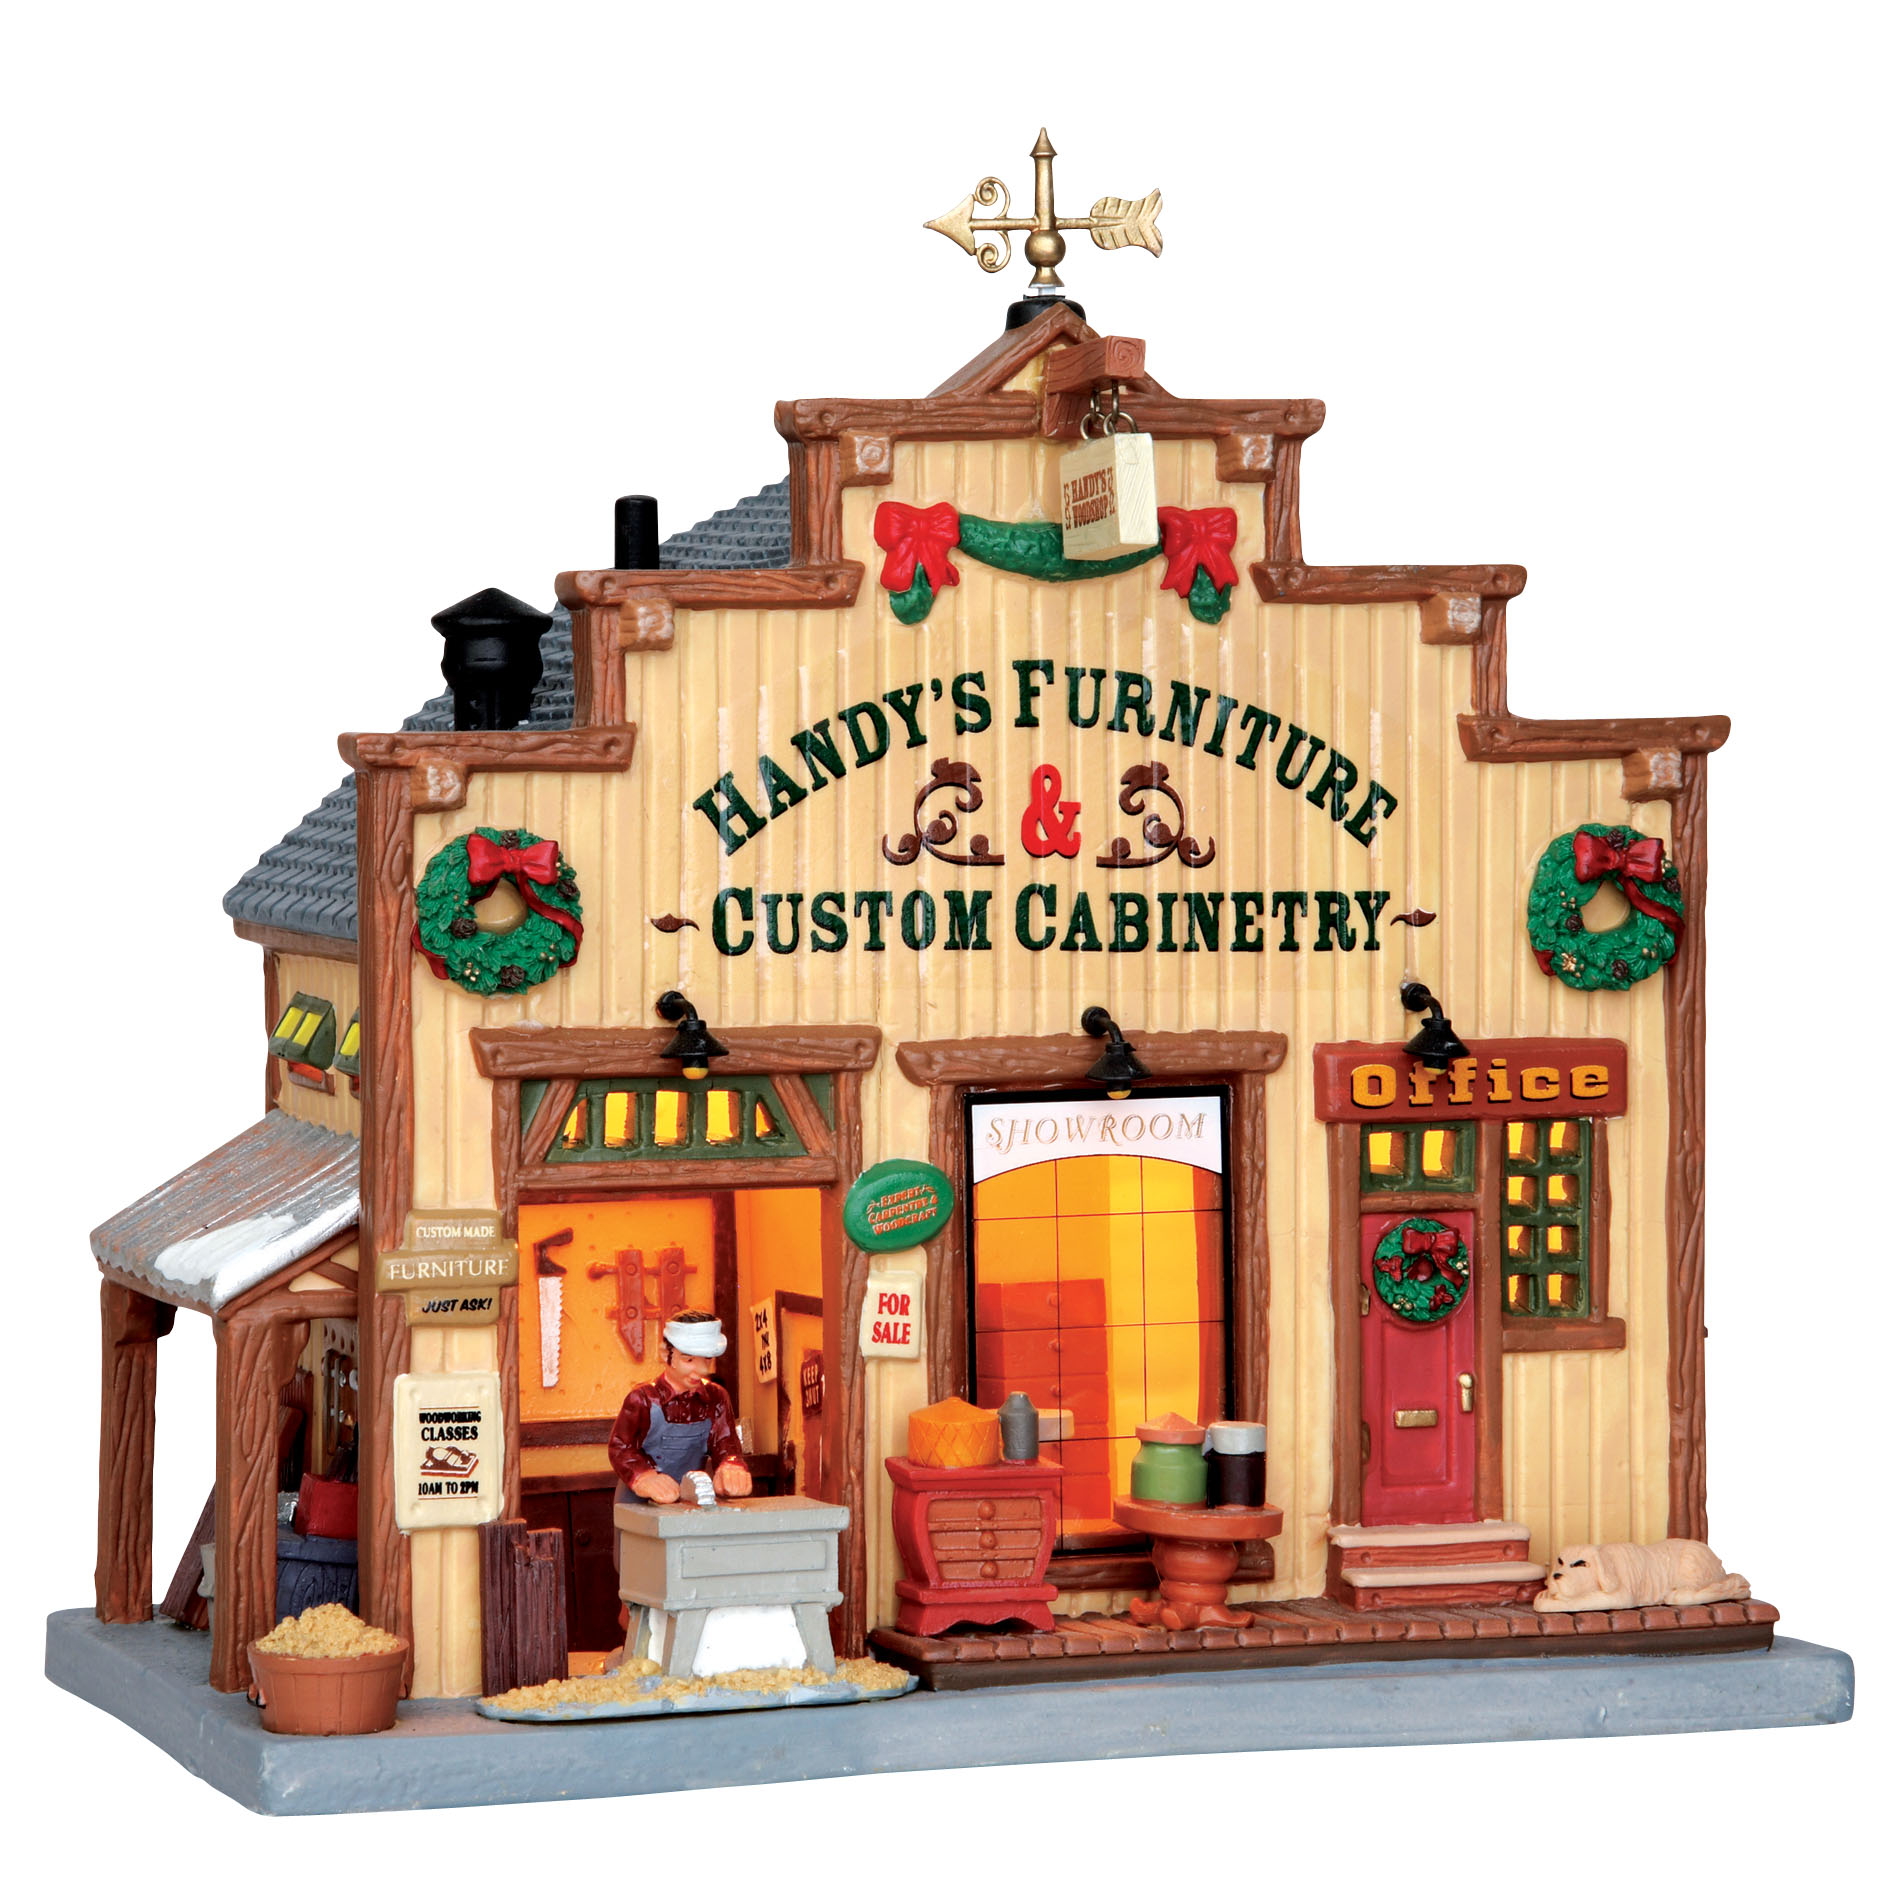 Lemax Village Collection Christmas Village Building Handy's Furniture & Custom Cabinetry